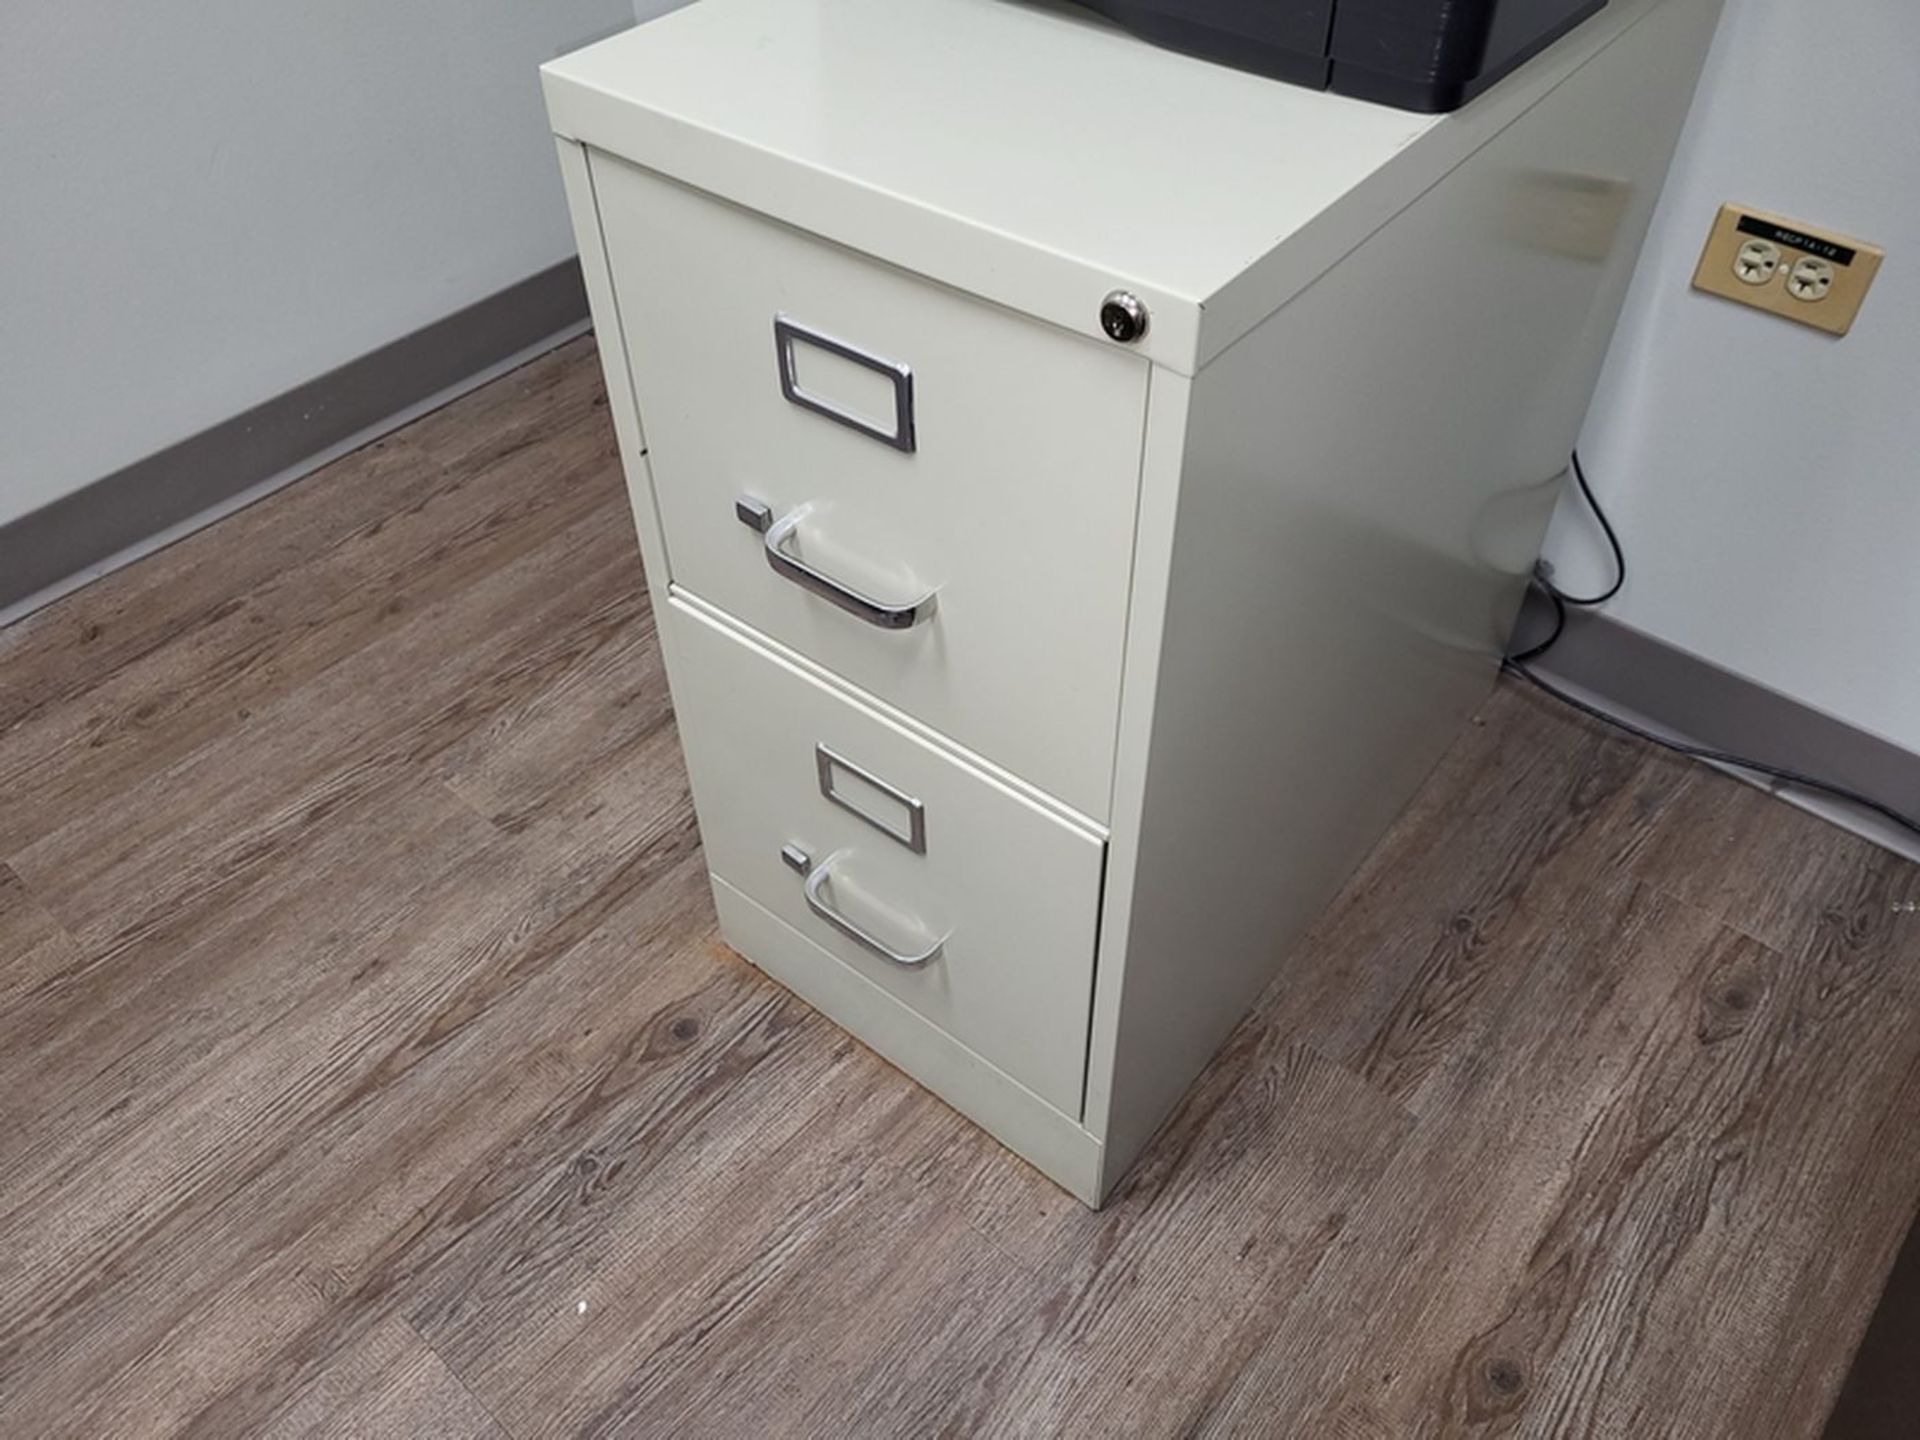 Lot - Office Furnishings; Include: (2) Desks, (2) Swivel Chairs, (1) 2-Drawer File, and (4) PC - Image 3 of 3